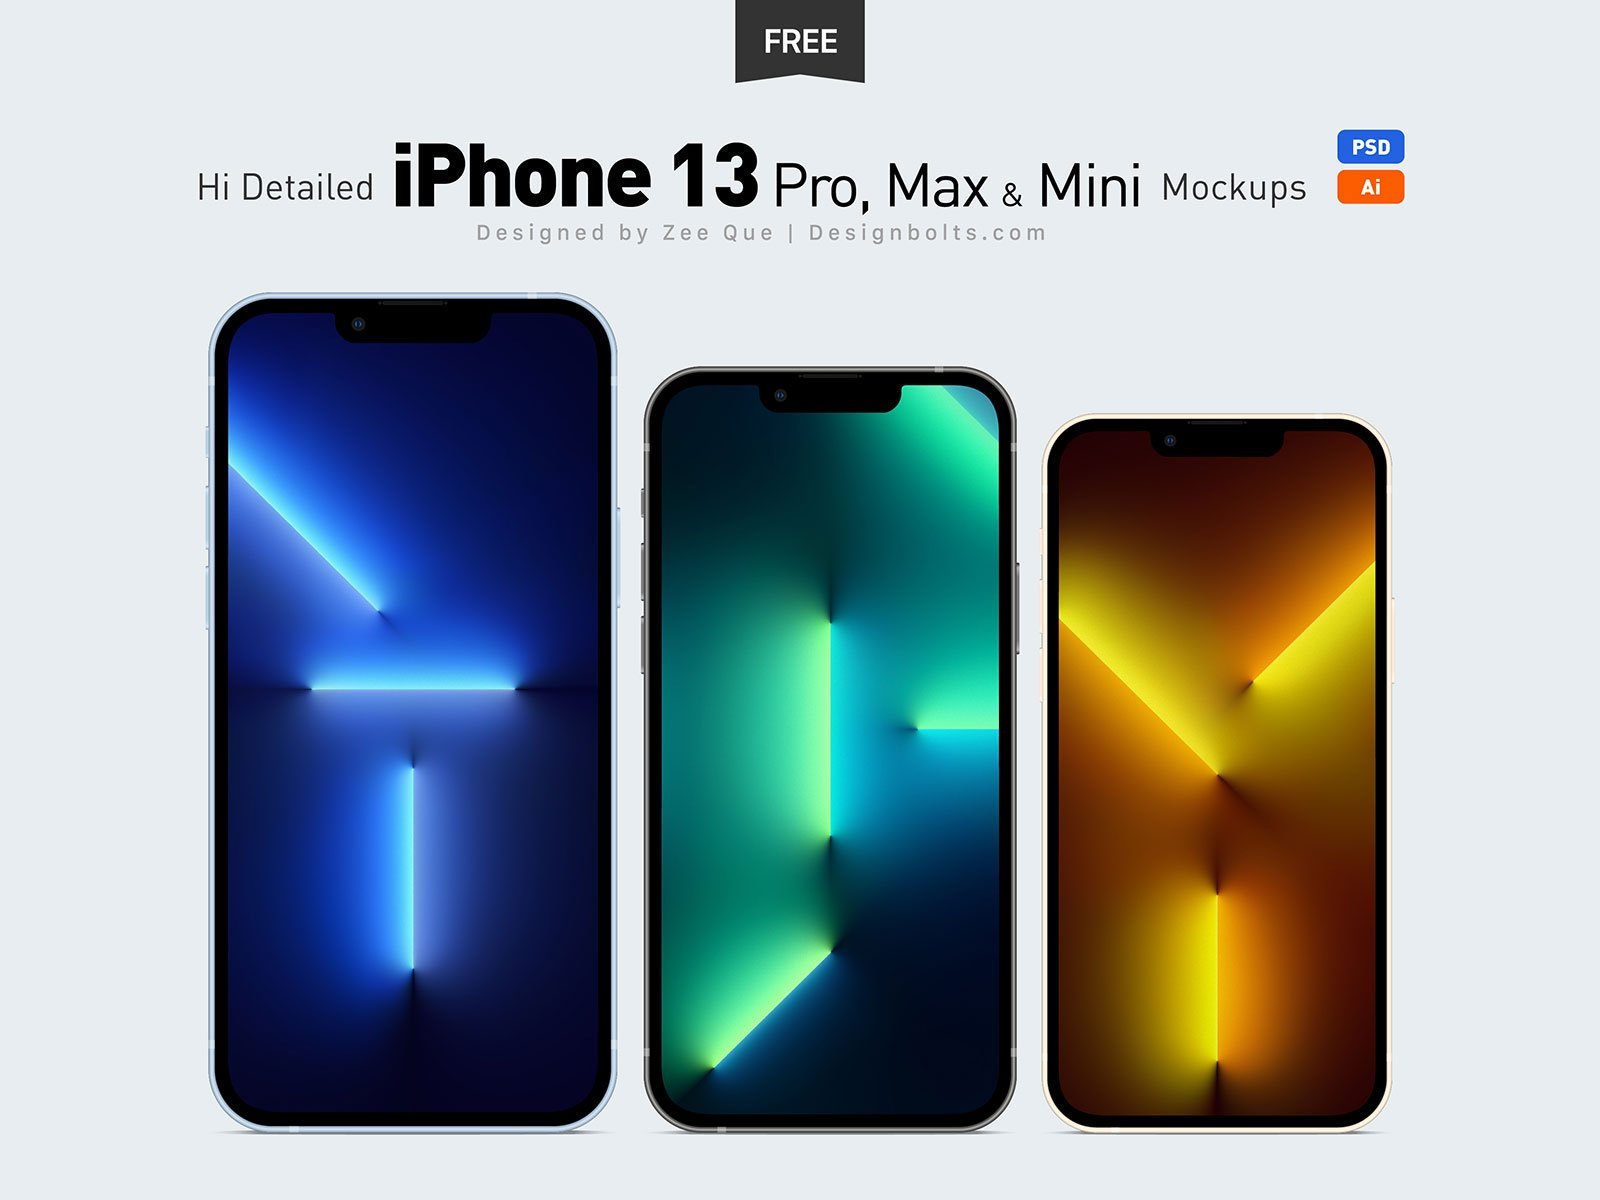 Front View of iPhone 13, iPhone 13 Pro, Max & Mini Ai & Mockups Set FREE PSD